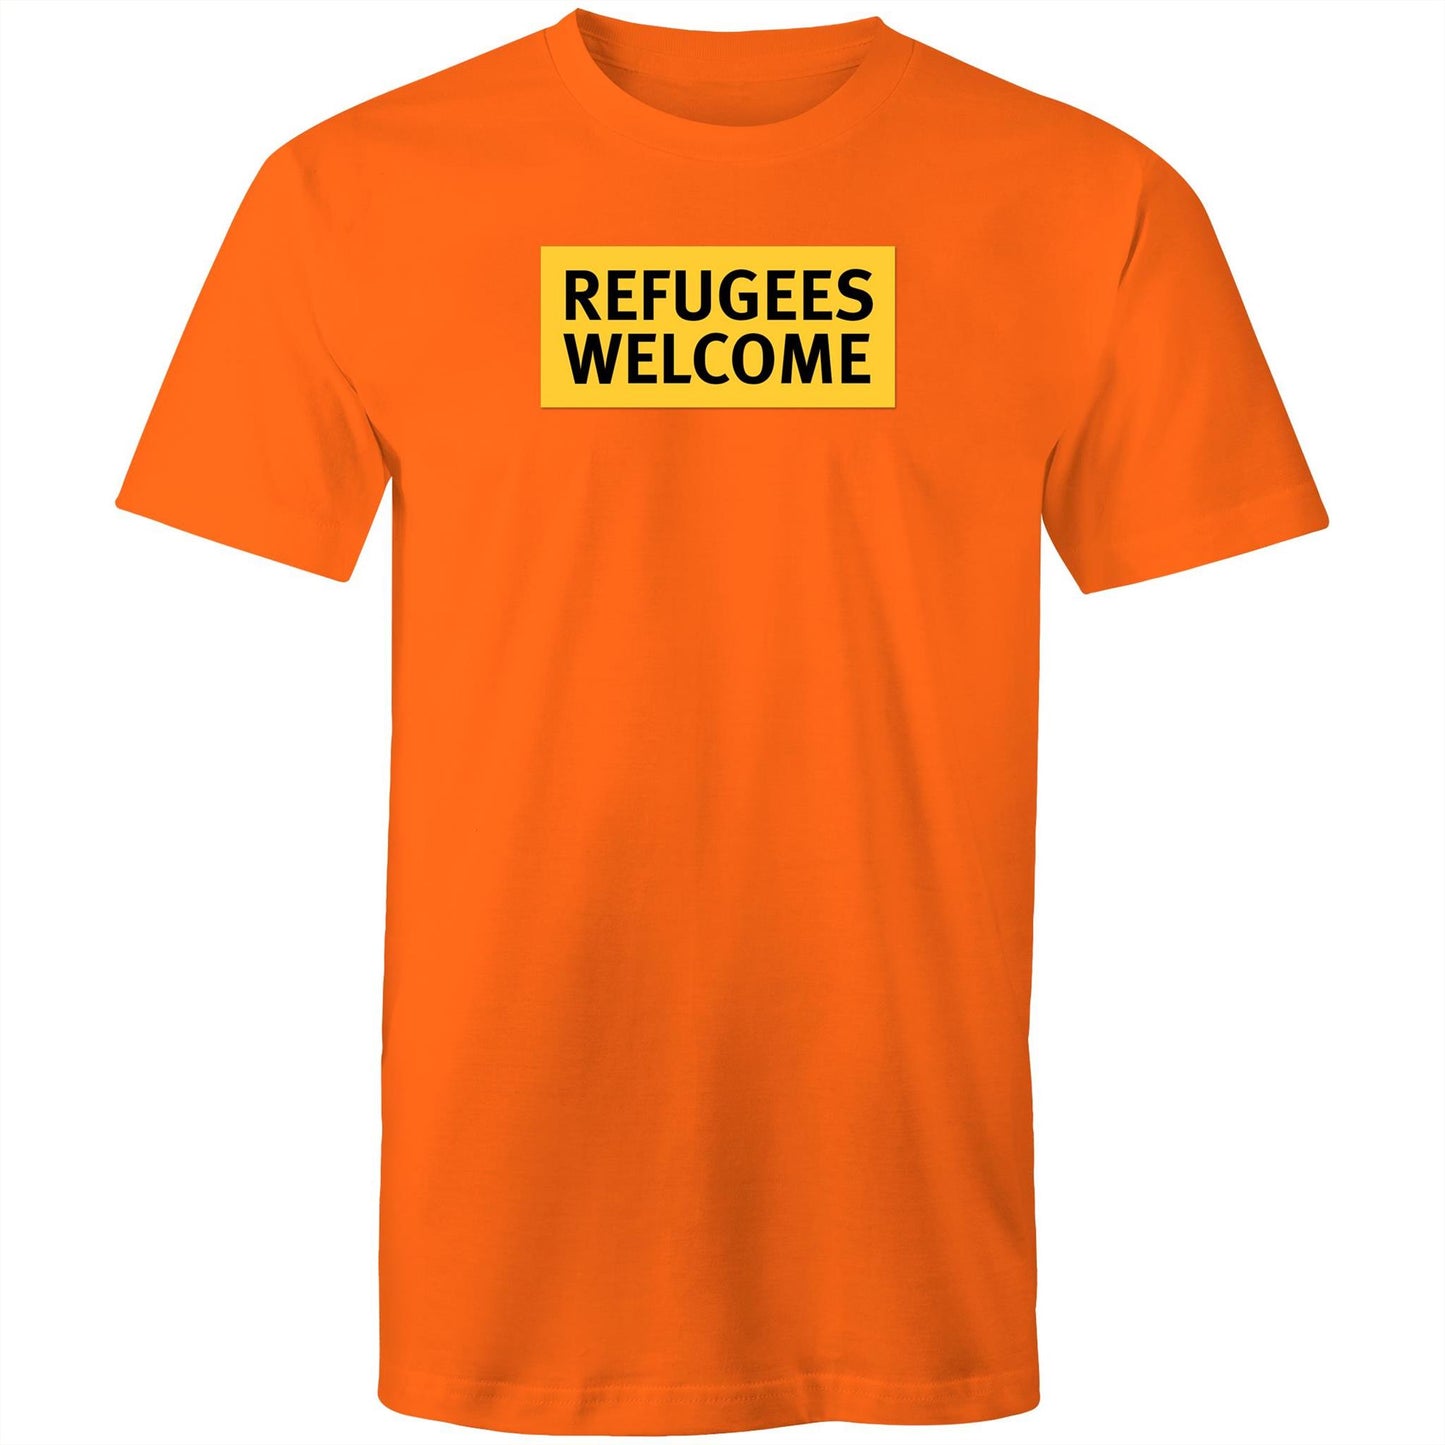 Refugees Welcome T Shirts for Men (Unisex)